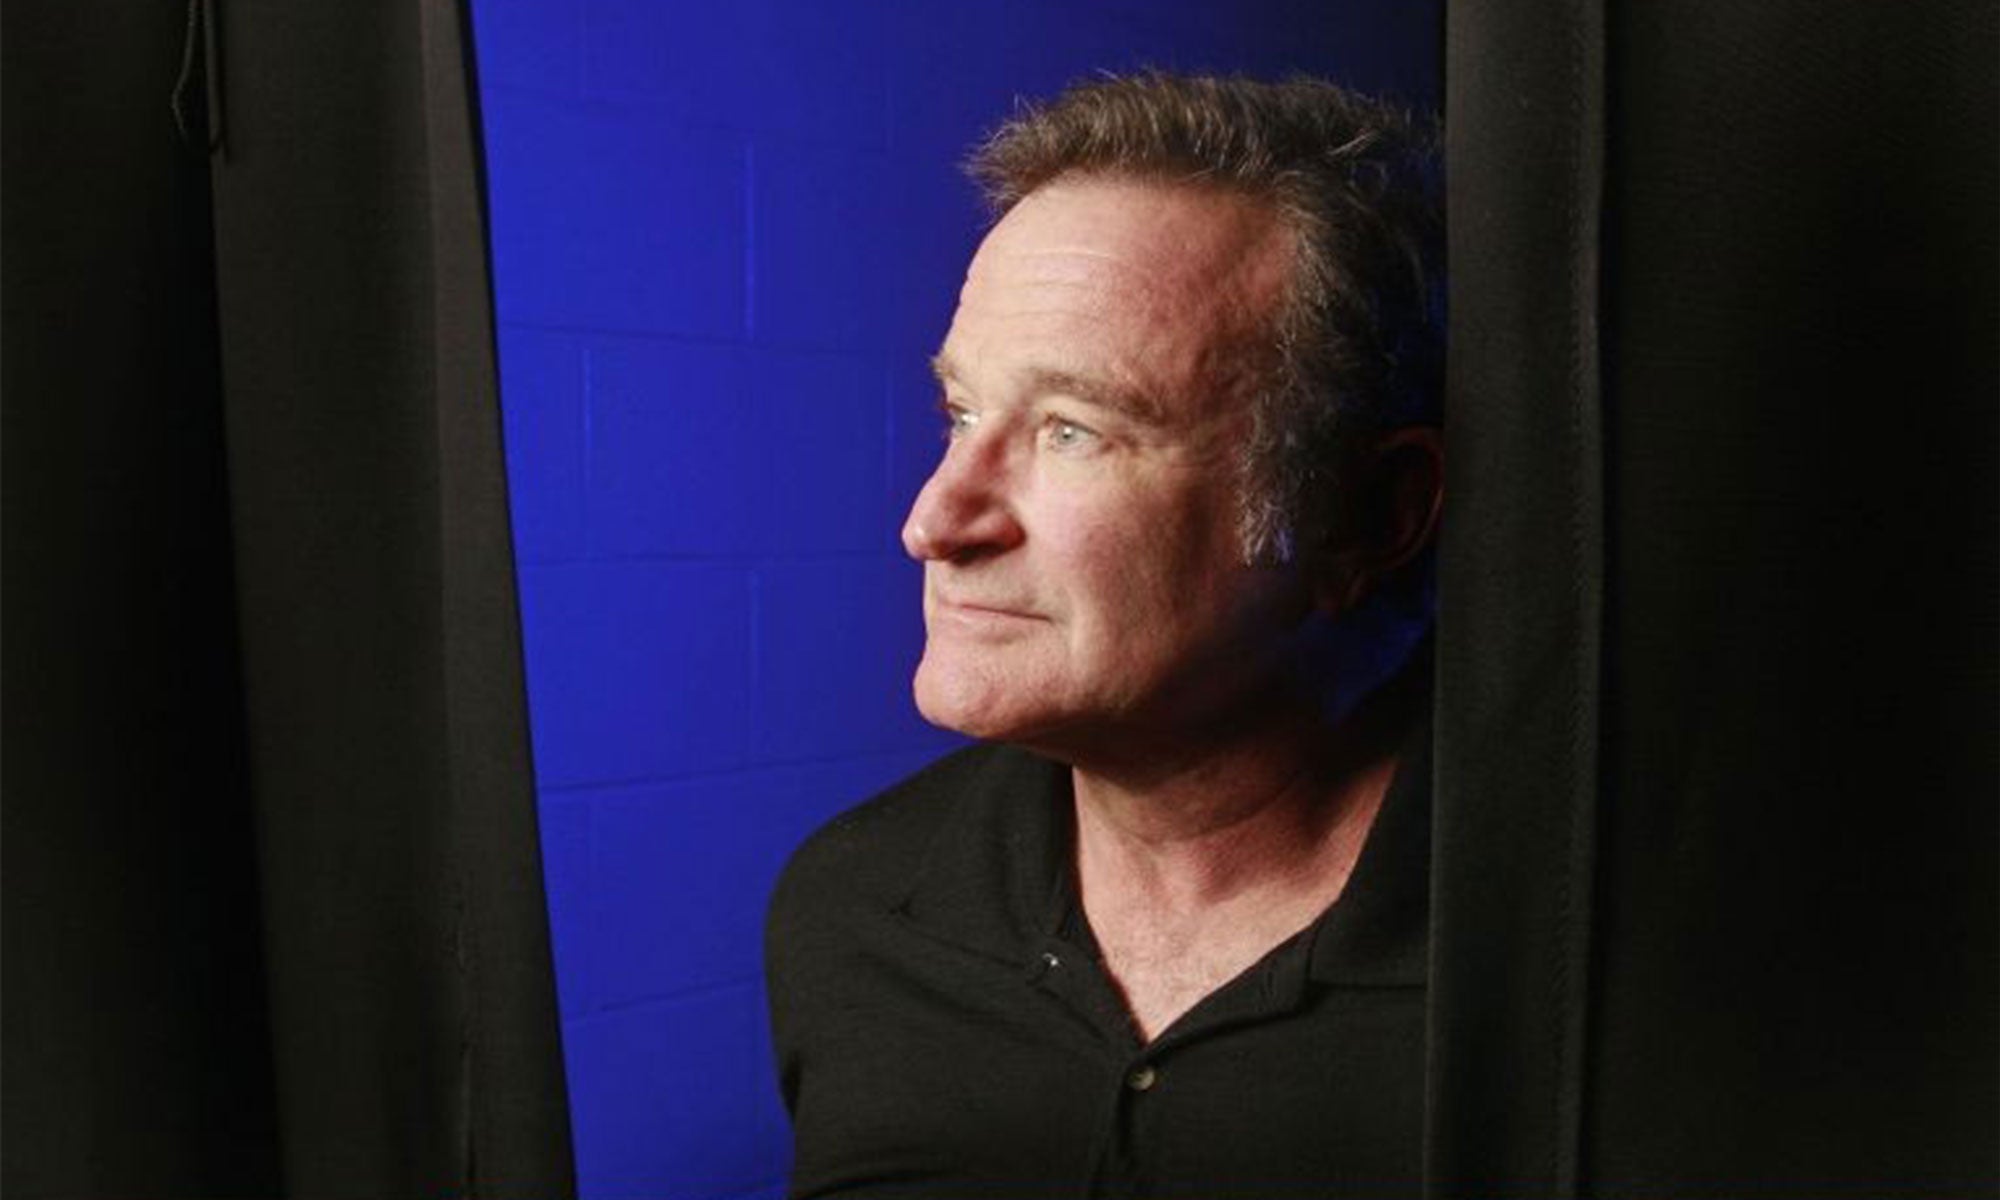 Robin Williams has died aged 63